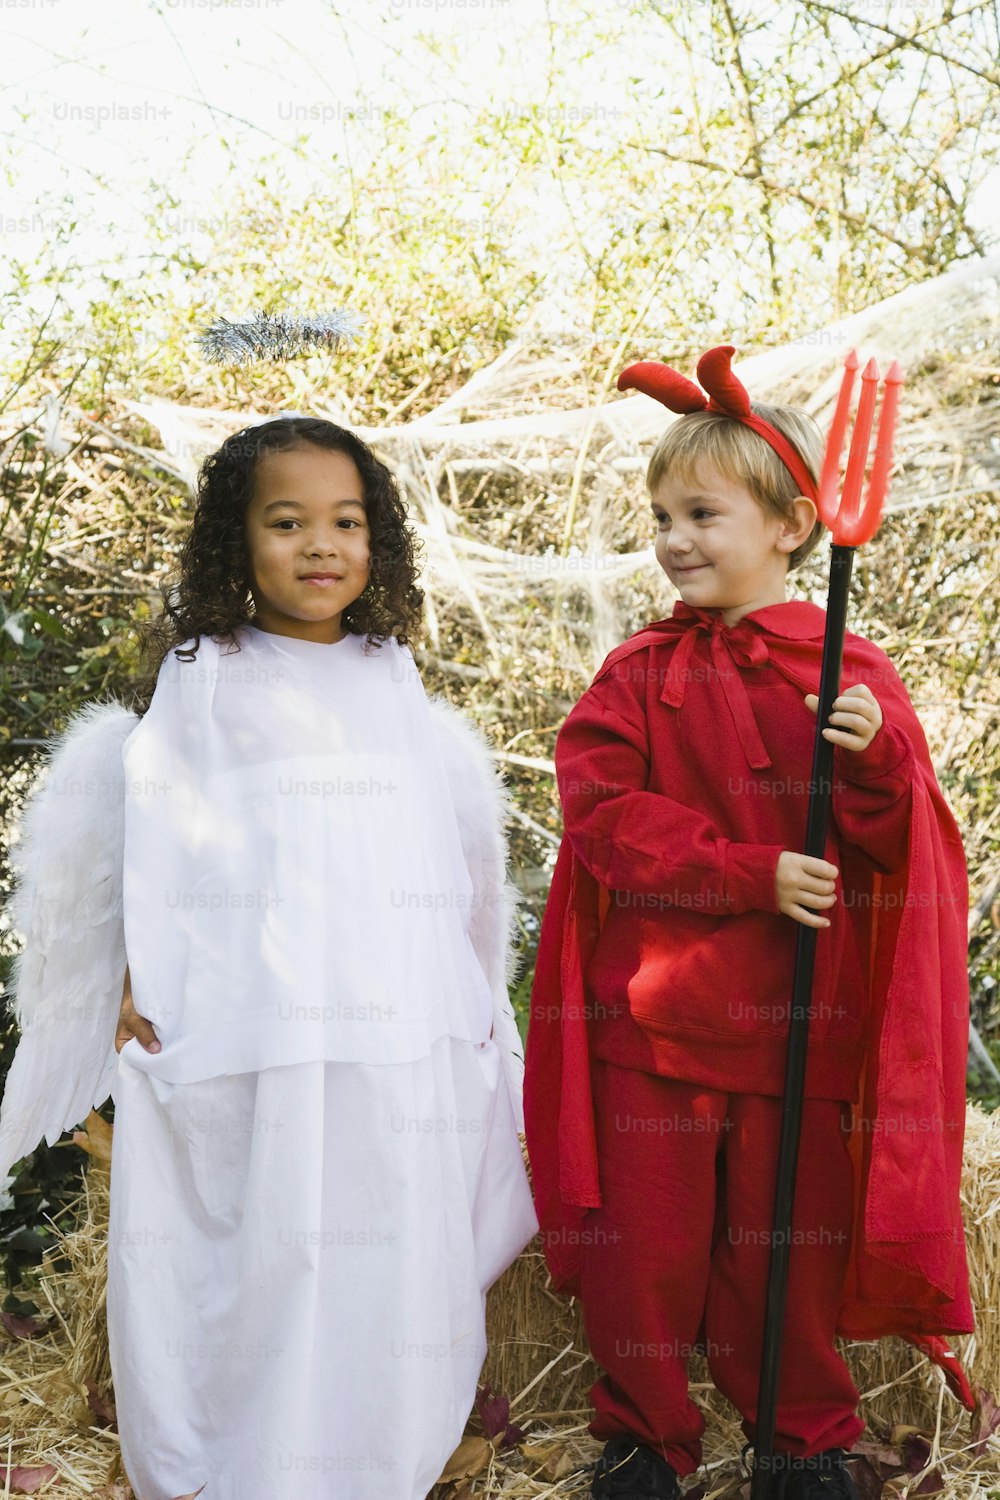 two children dressed in costumes standing next to each other